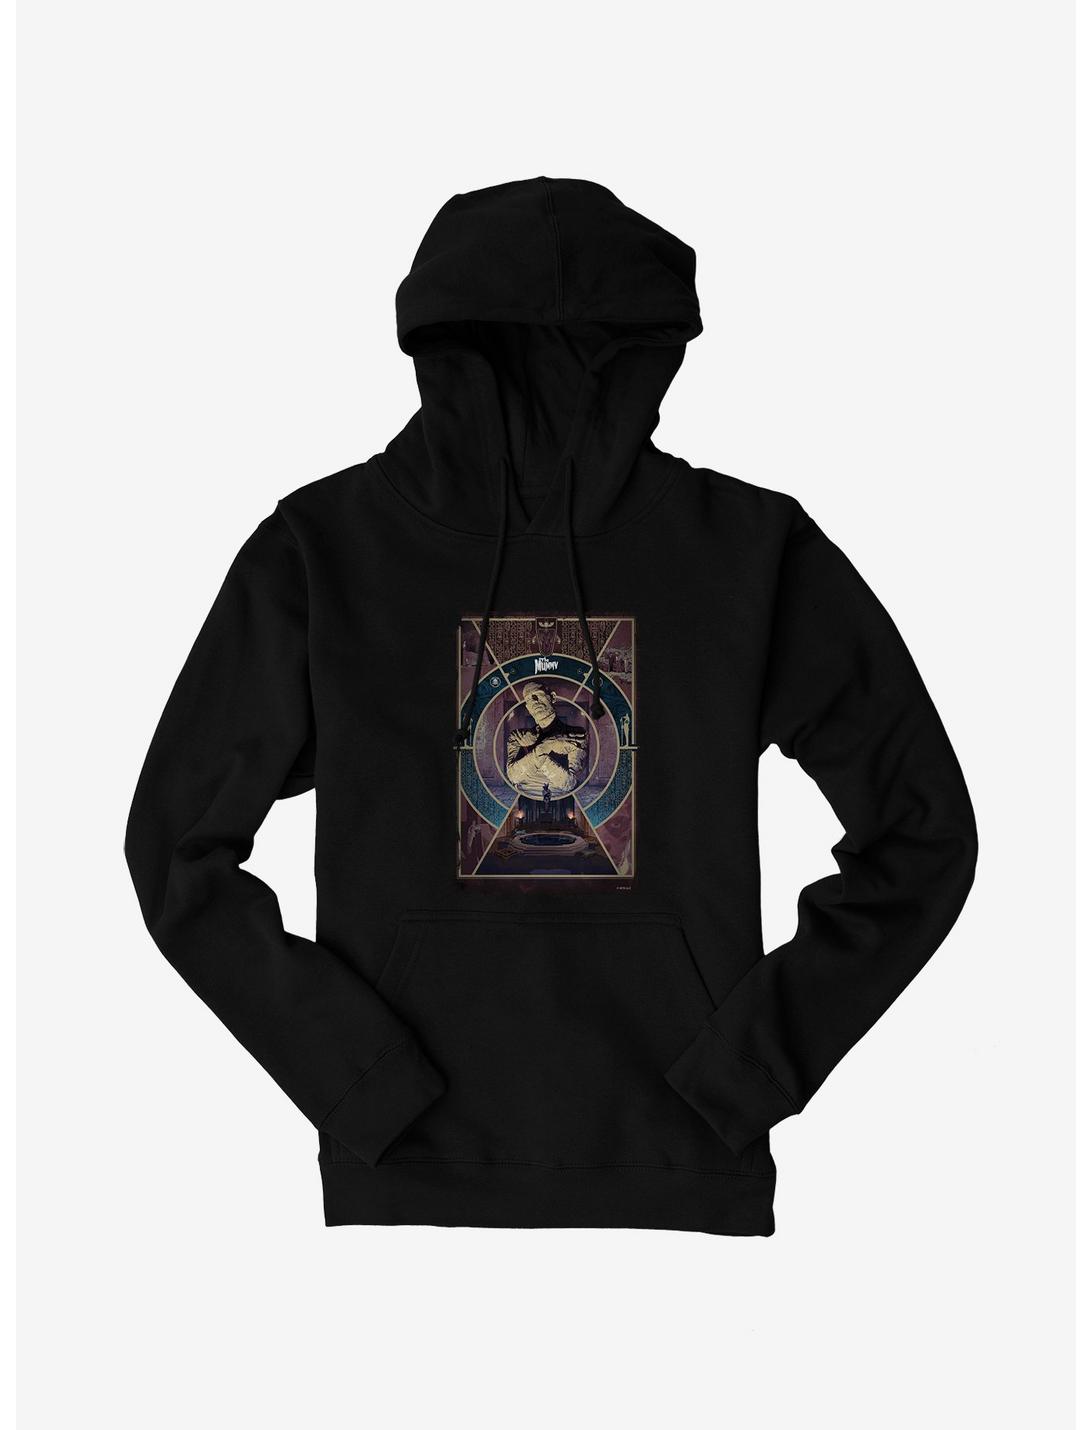 Universal Monsters The Mummy Relic Poster Hoodie, , hi-res